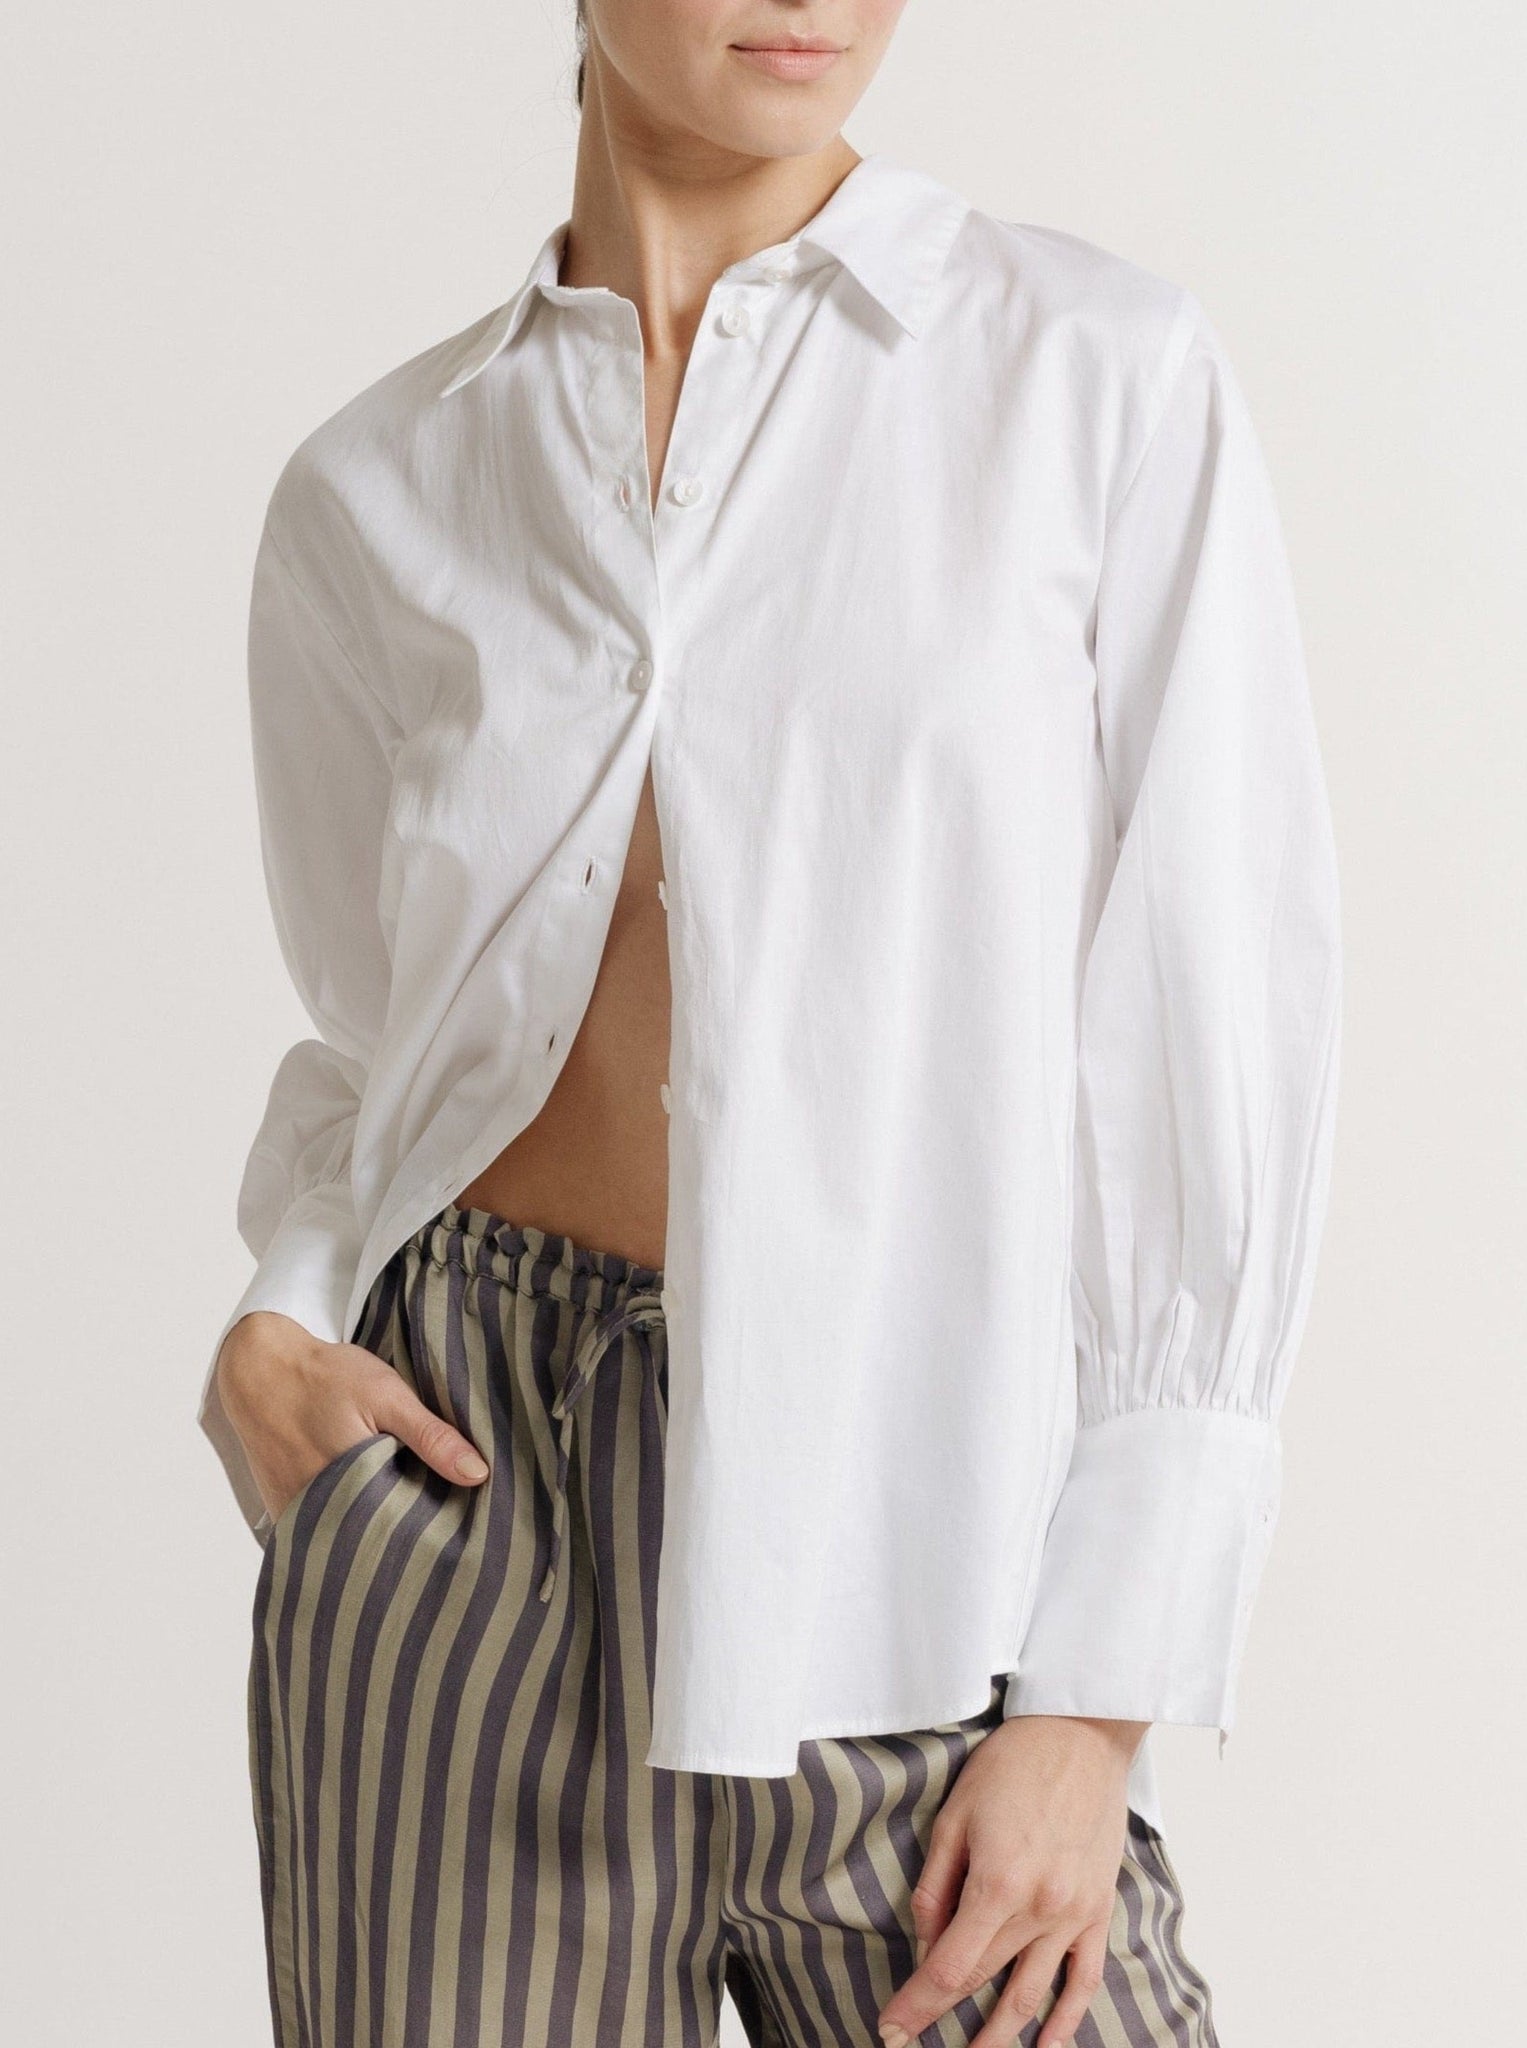 The model is wearing striped pants and a Museo Button Up - White Poplin shirt made from organic cotton.